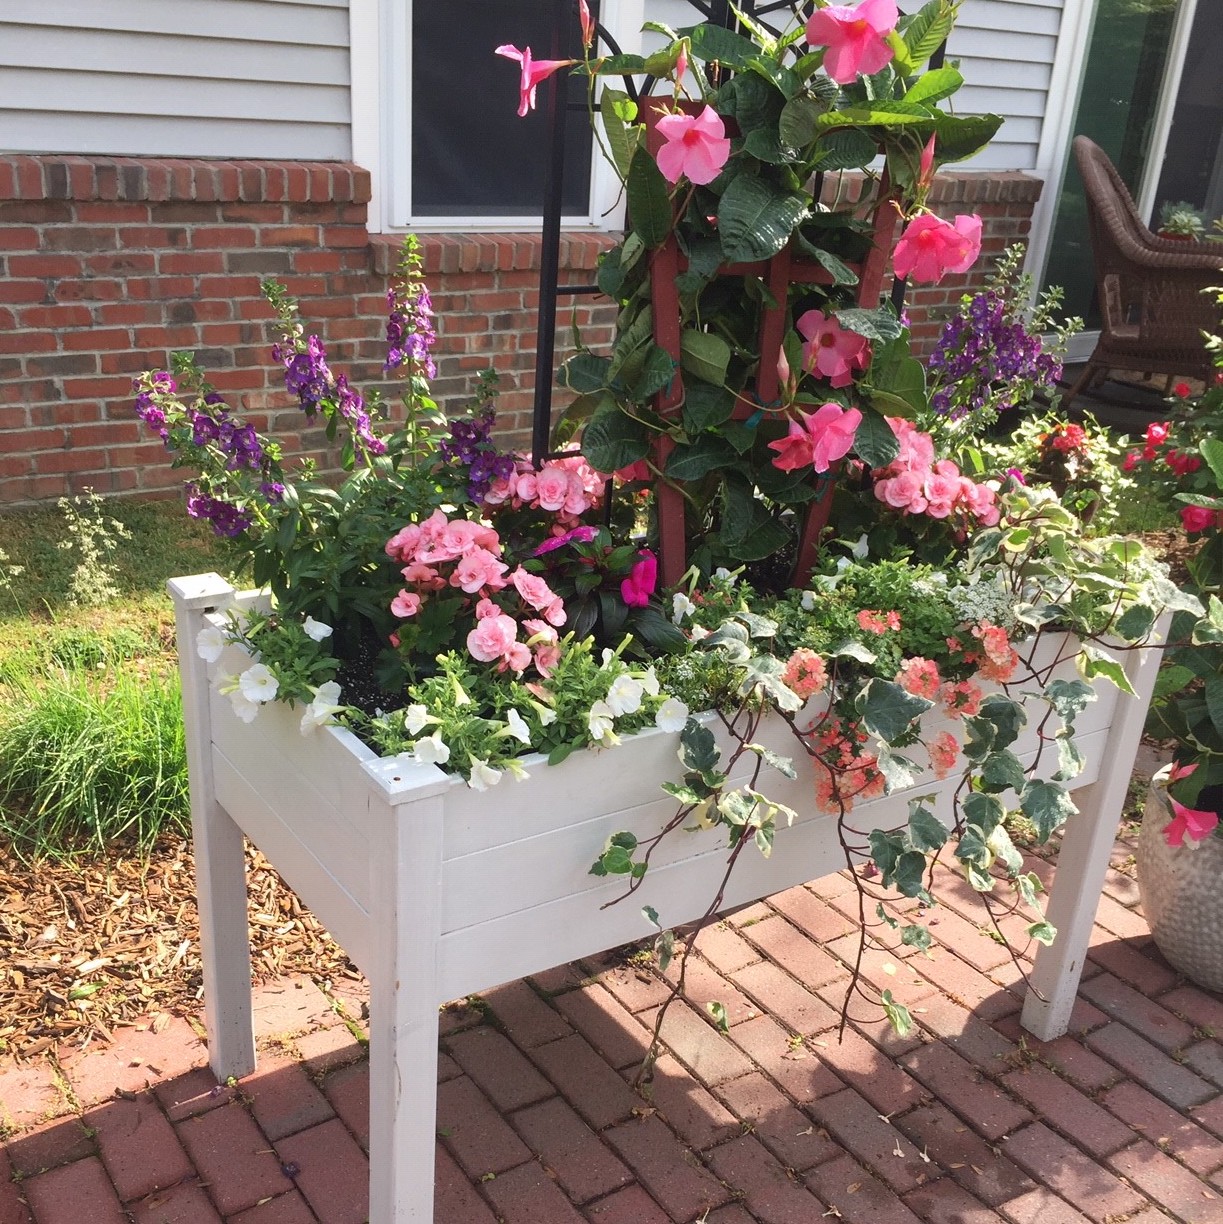 A photo of flowers from RVNAhealth Caregiver Susan